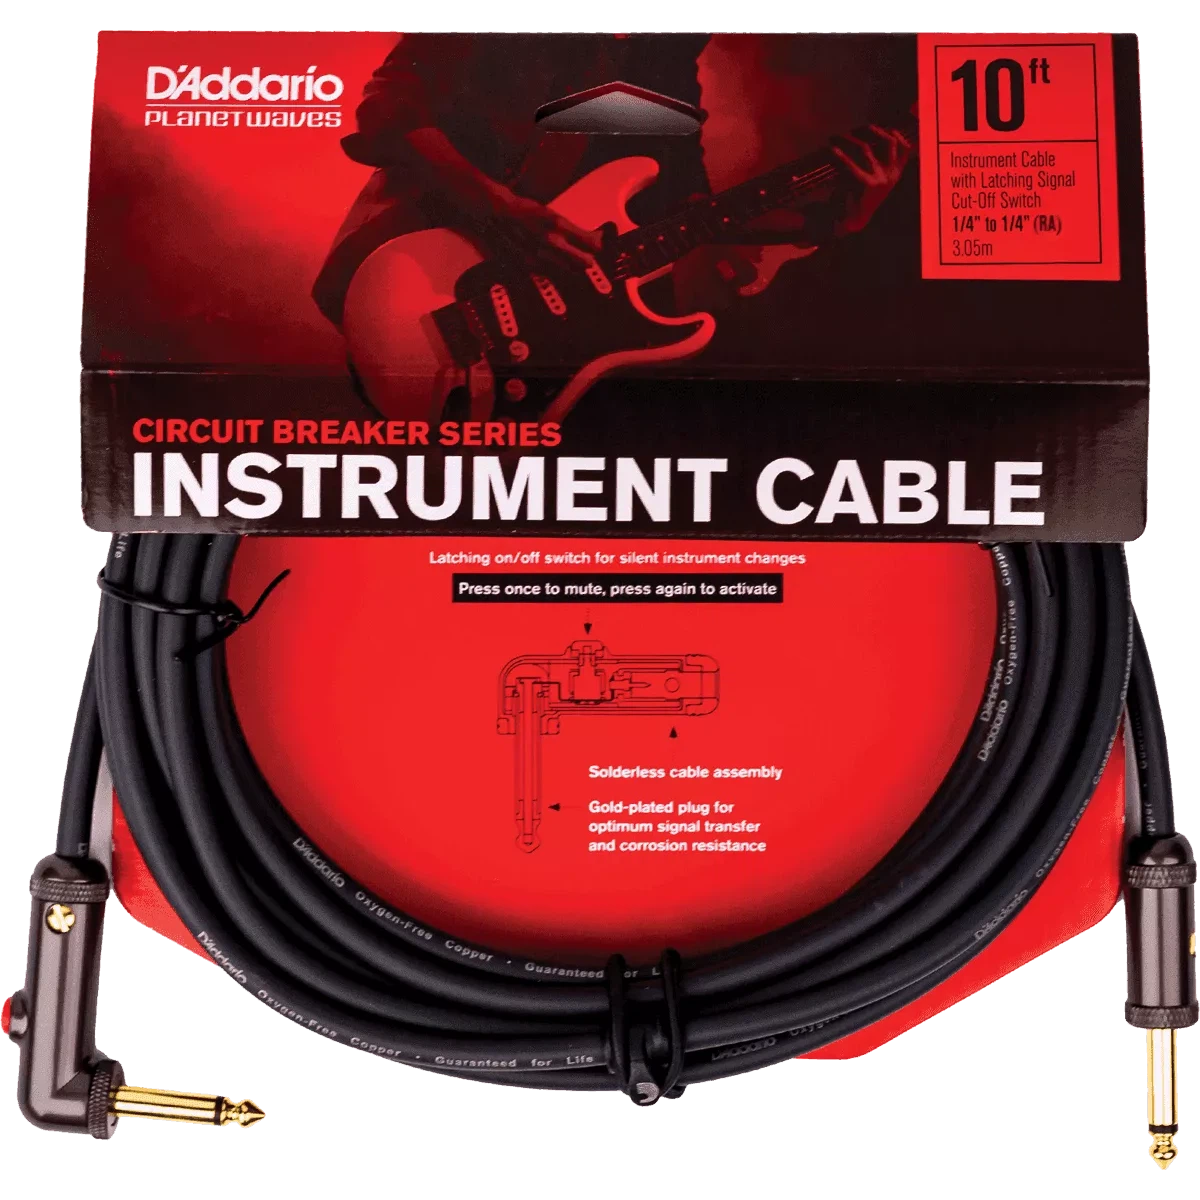 Dây Cáp Kết Nối D'Addario Circuit Breaker Instrument Cable PW-AGLRA - Việt Music